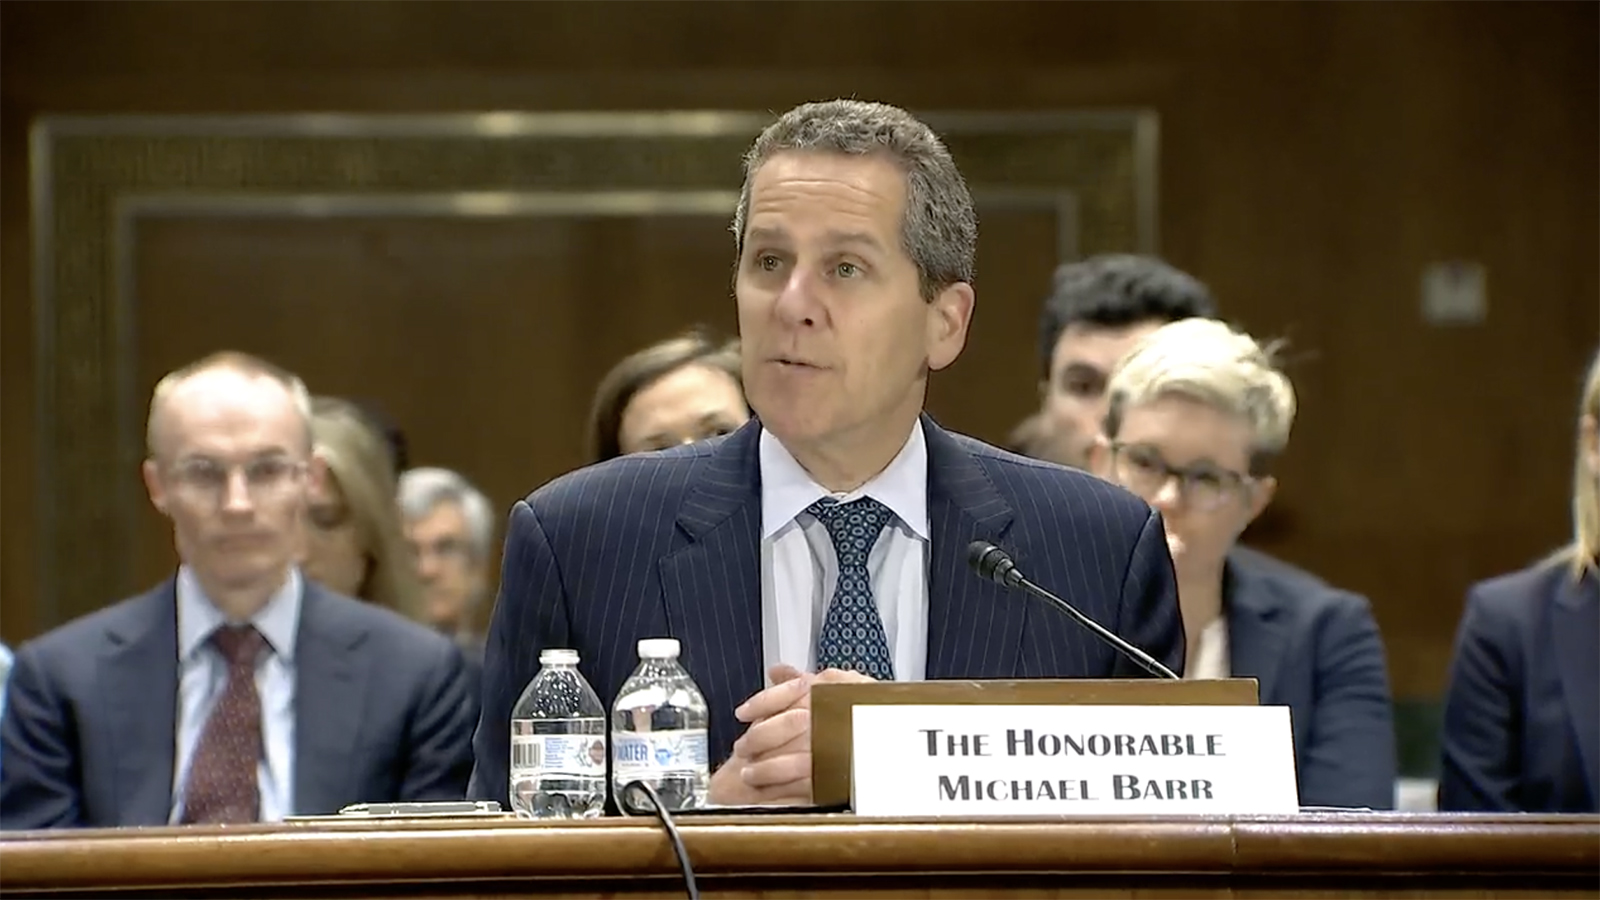 Michael Barr, vice chair for supervision at the US Federal Reserve, speaks at a Senate Banking, Housing, and Urban Affairs Committee hearing in Washington, DC, today.